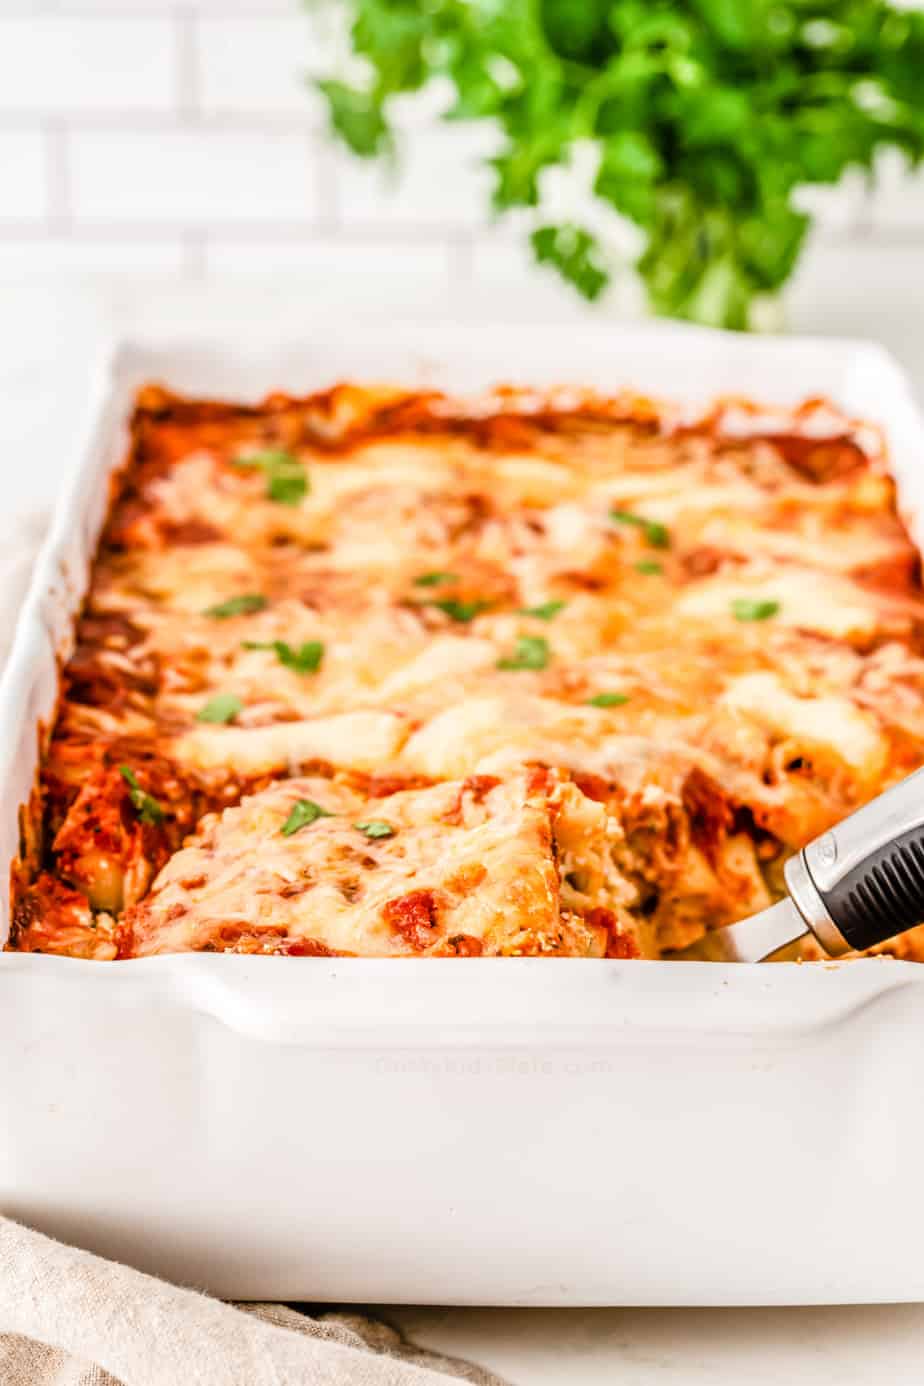 Baked ziti covered in a melted cheese in a pan with a spoon beginning to lift out a serving.